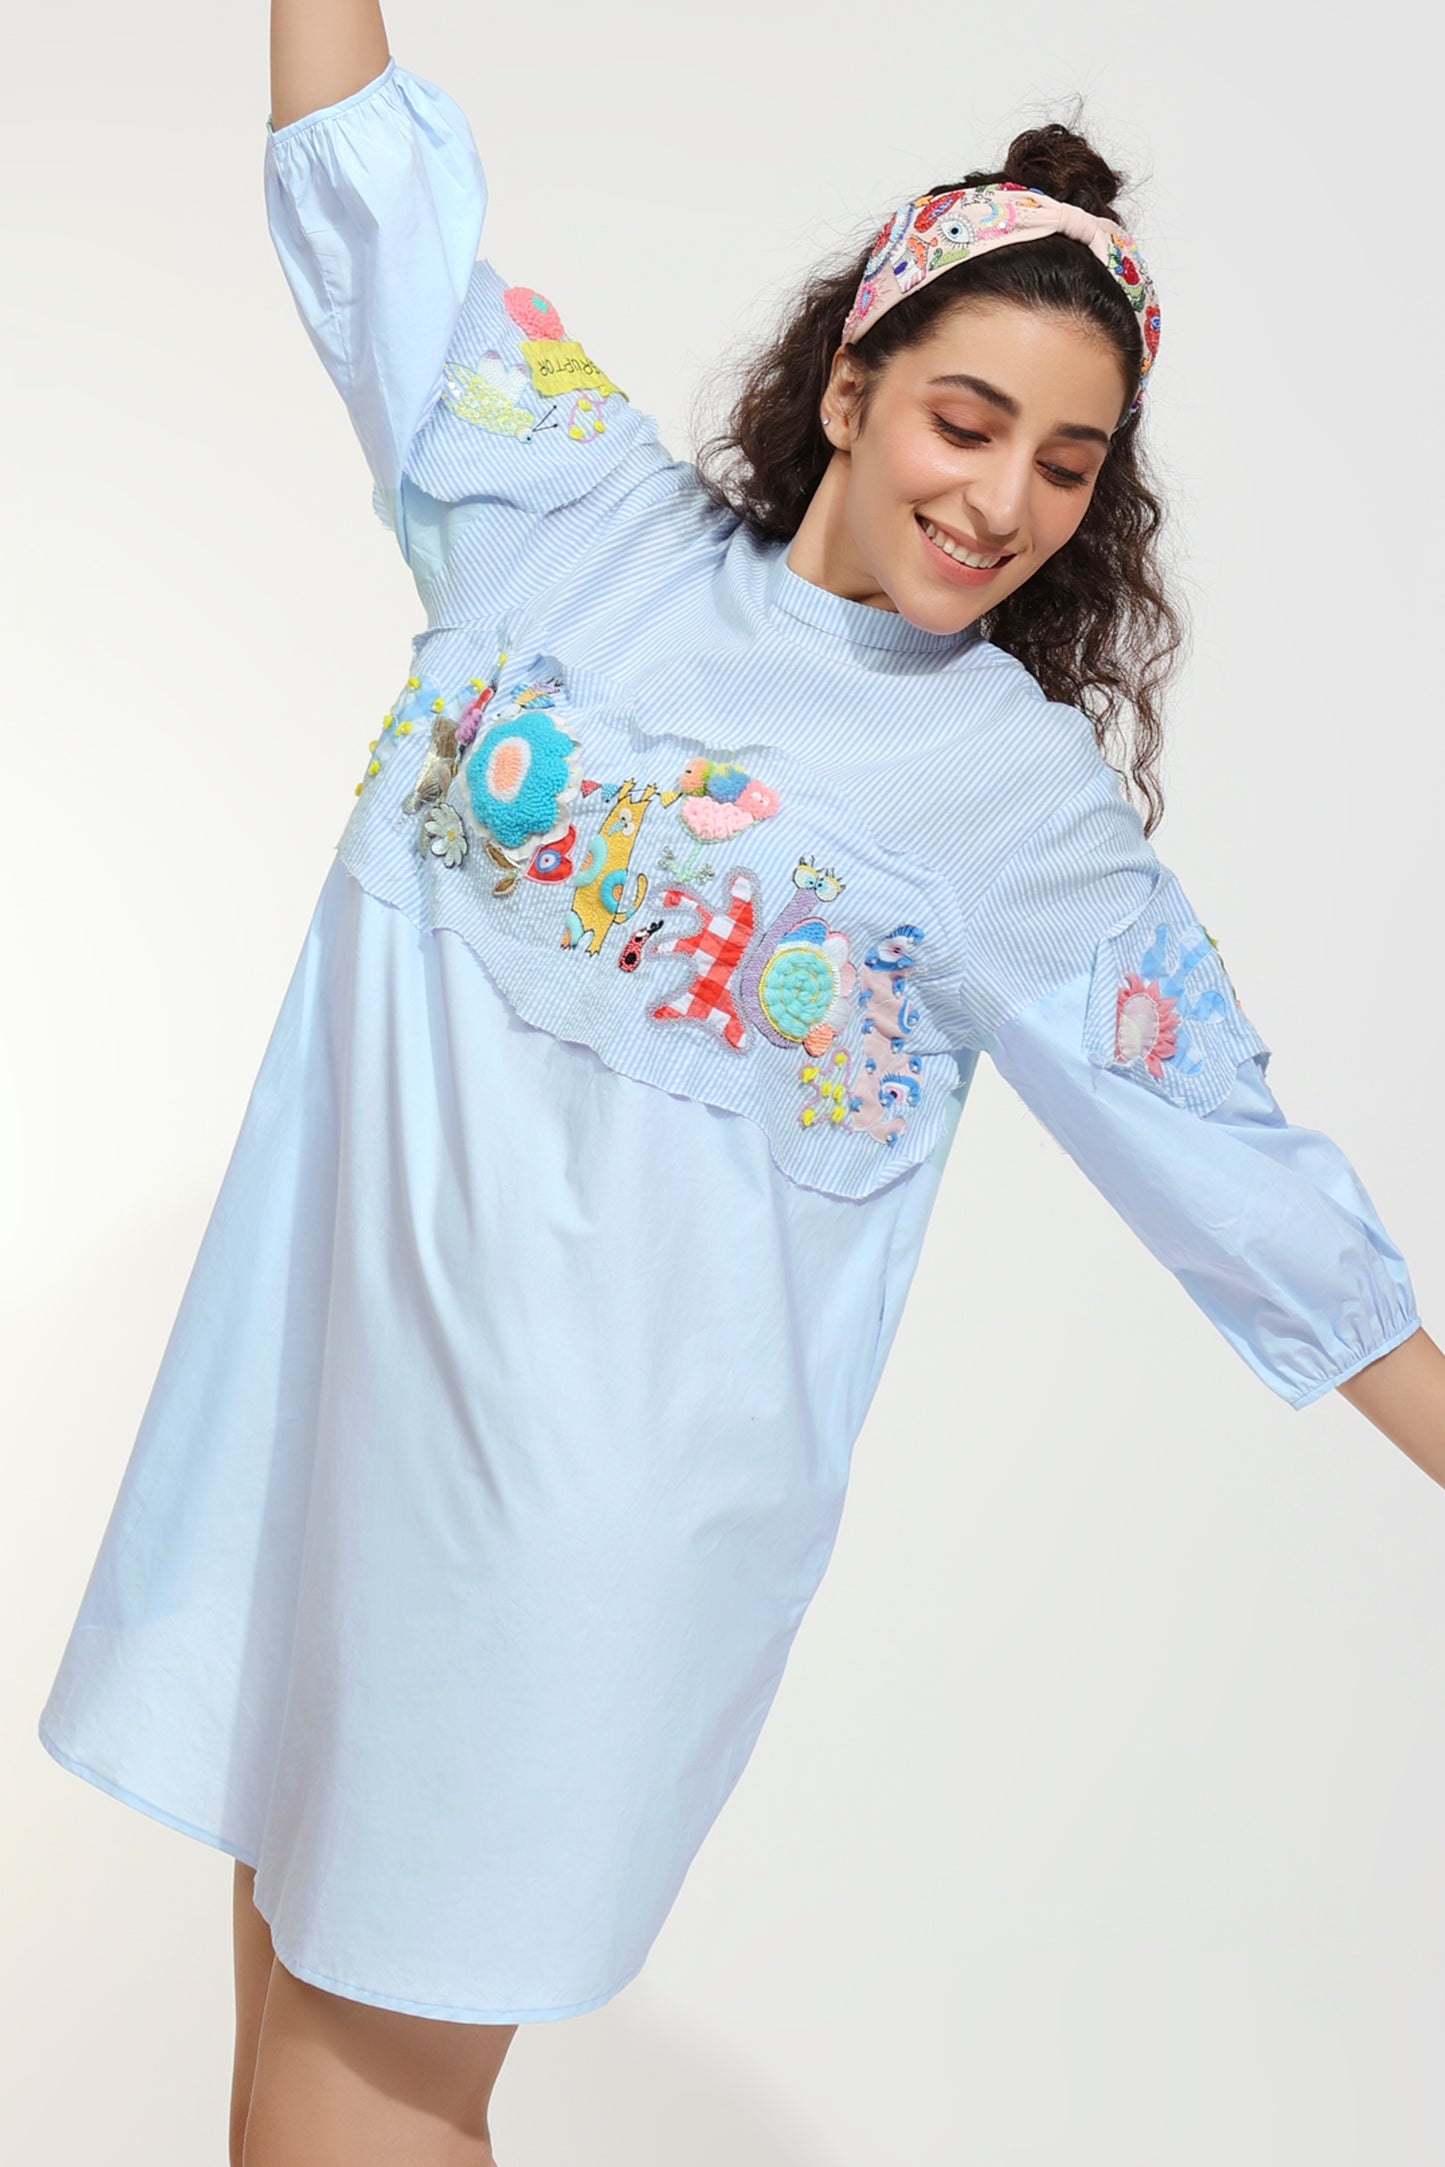 Fly High Blue Embroidered Dress (Joey & Pooh)